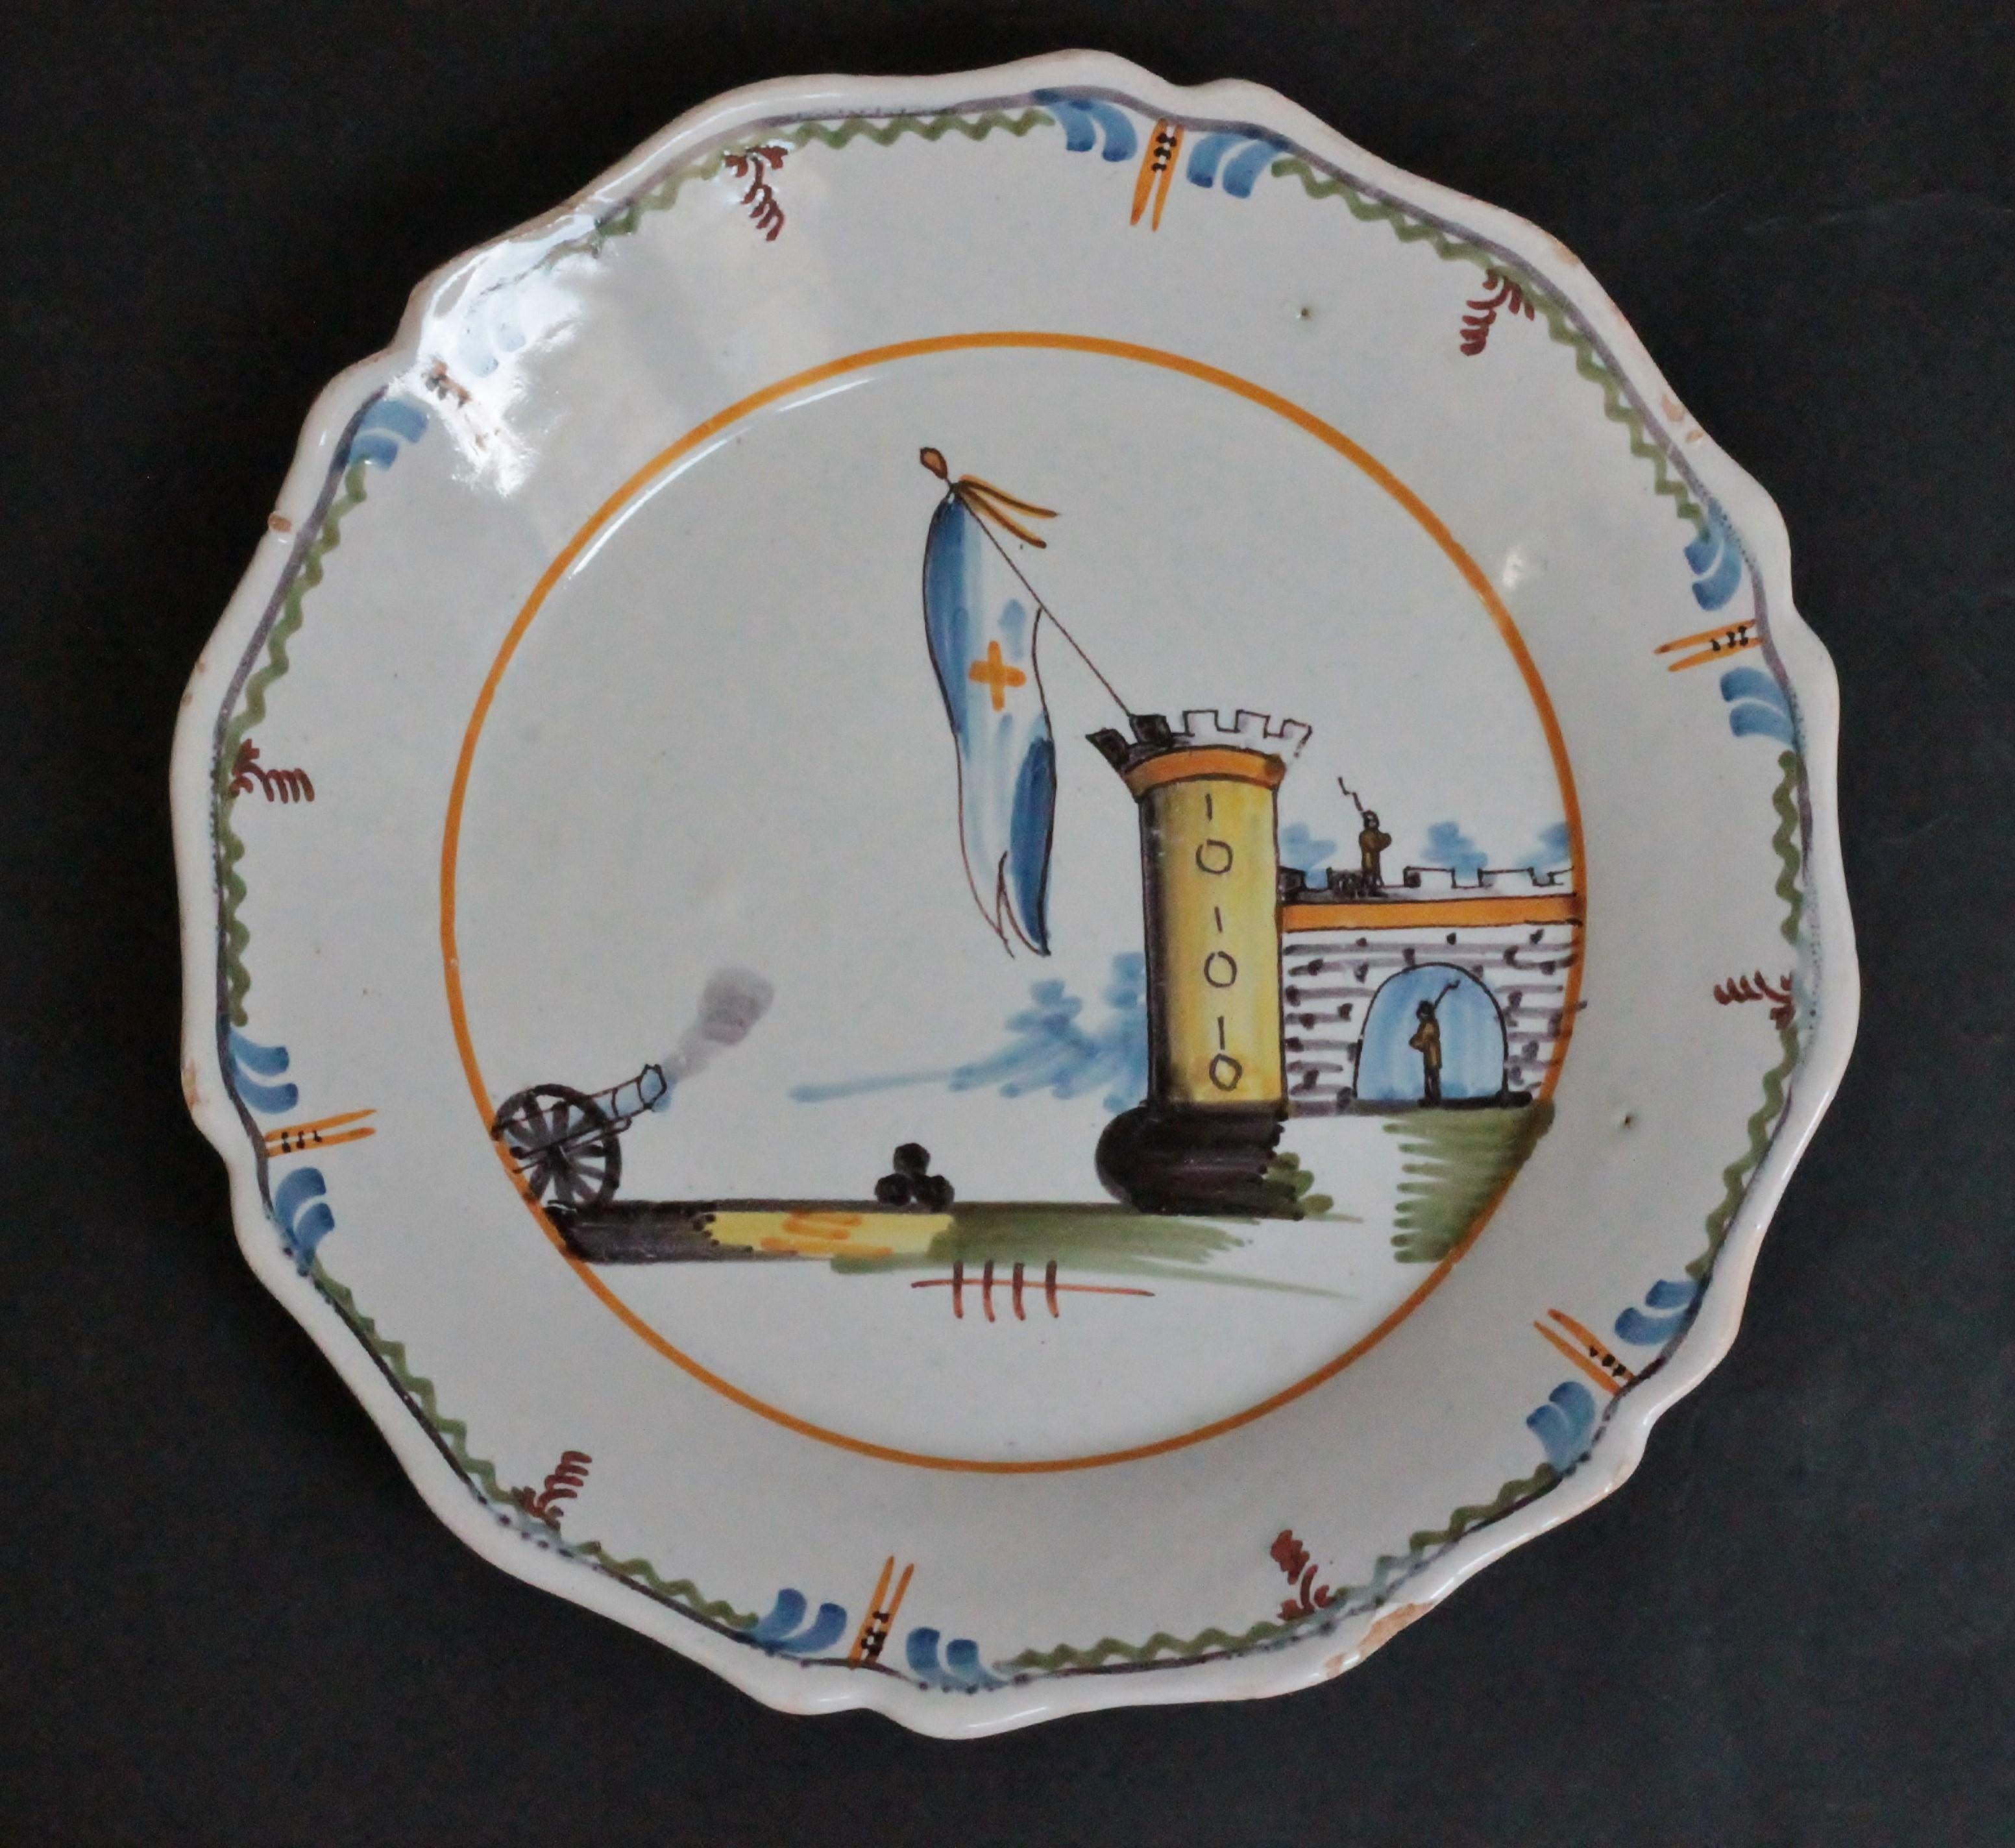 A Nevers (France) faience plate with a polychrome decoration of revolutionary period, the storming of the Bastille,
18th century.
Measures: Diameter 23 cm; height 3.4 cm.
Several losses to the glaze around the rim.
Cf. Collection L. Heitschel N°